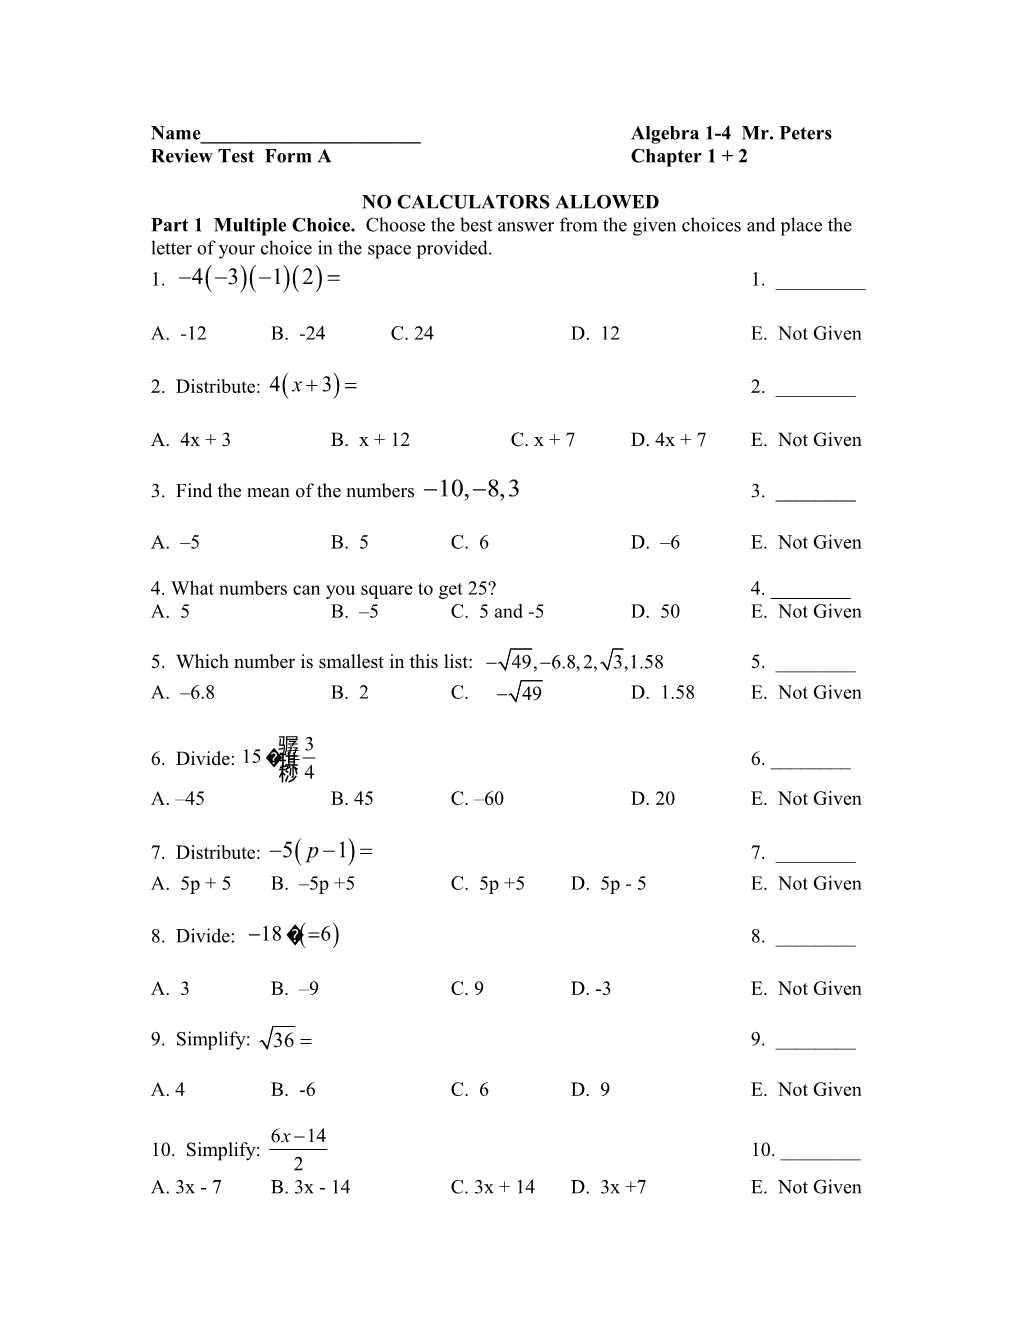 Review Test Form a Chapter 1 + 2